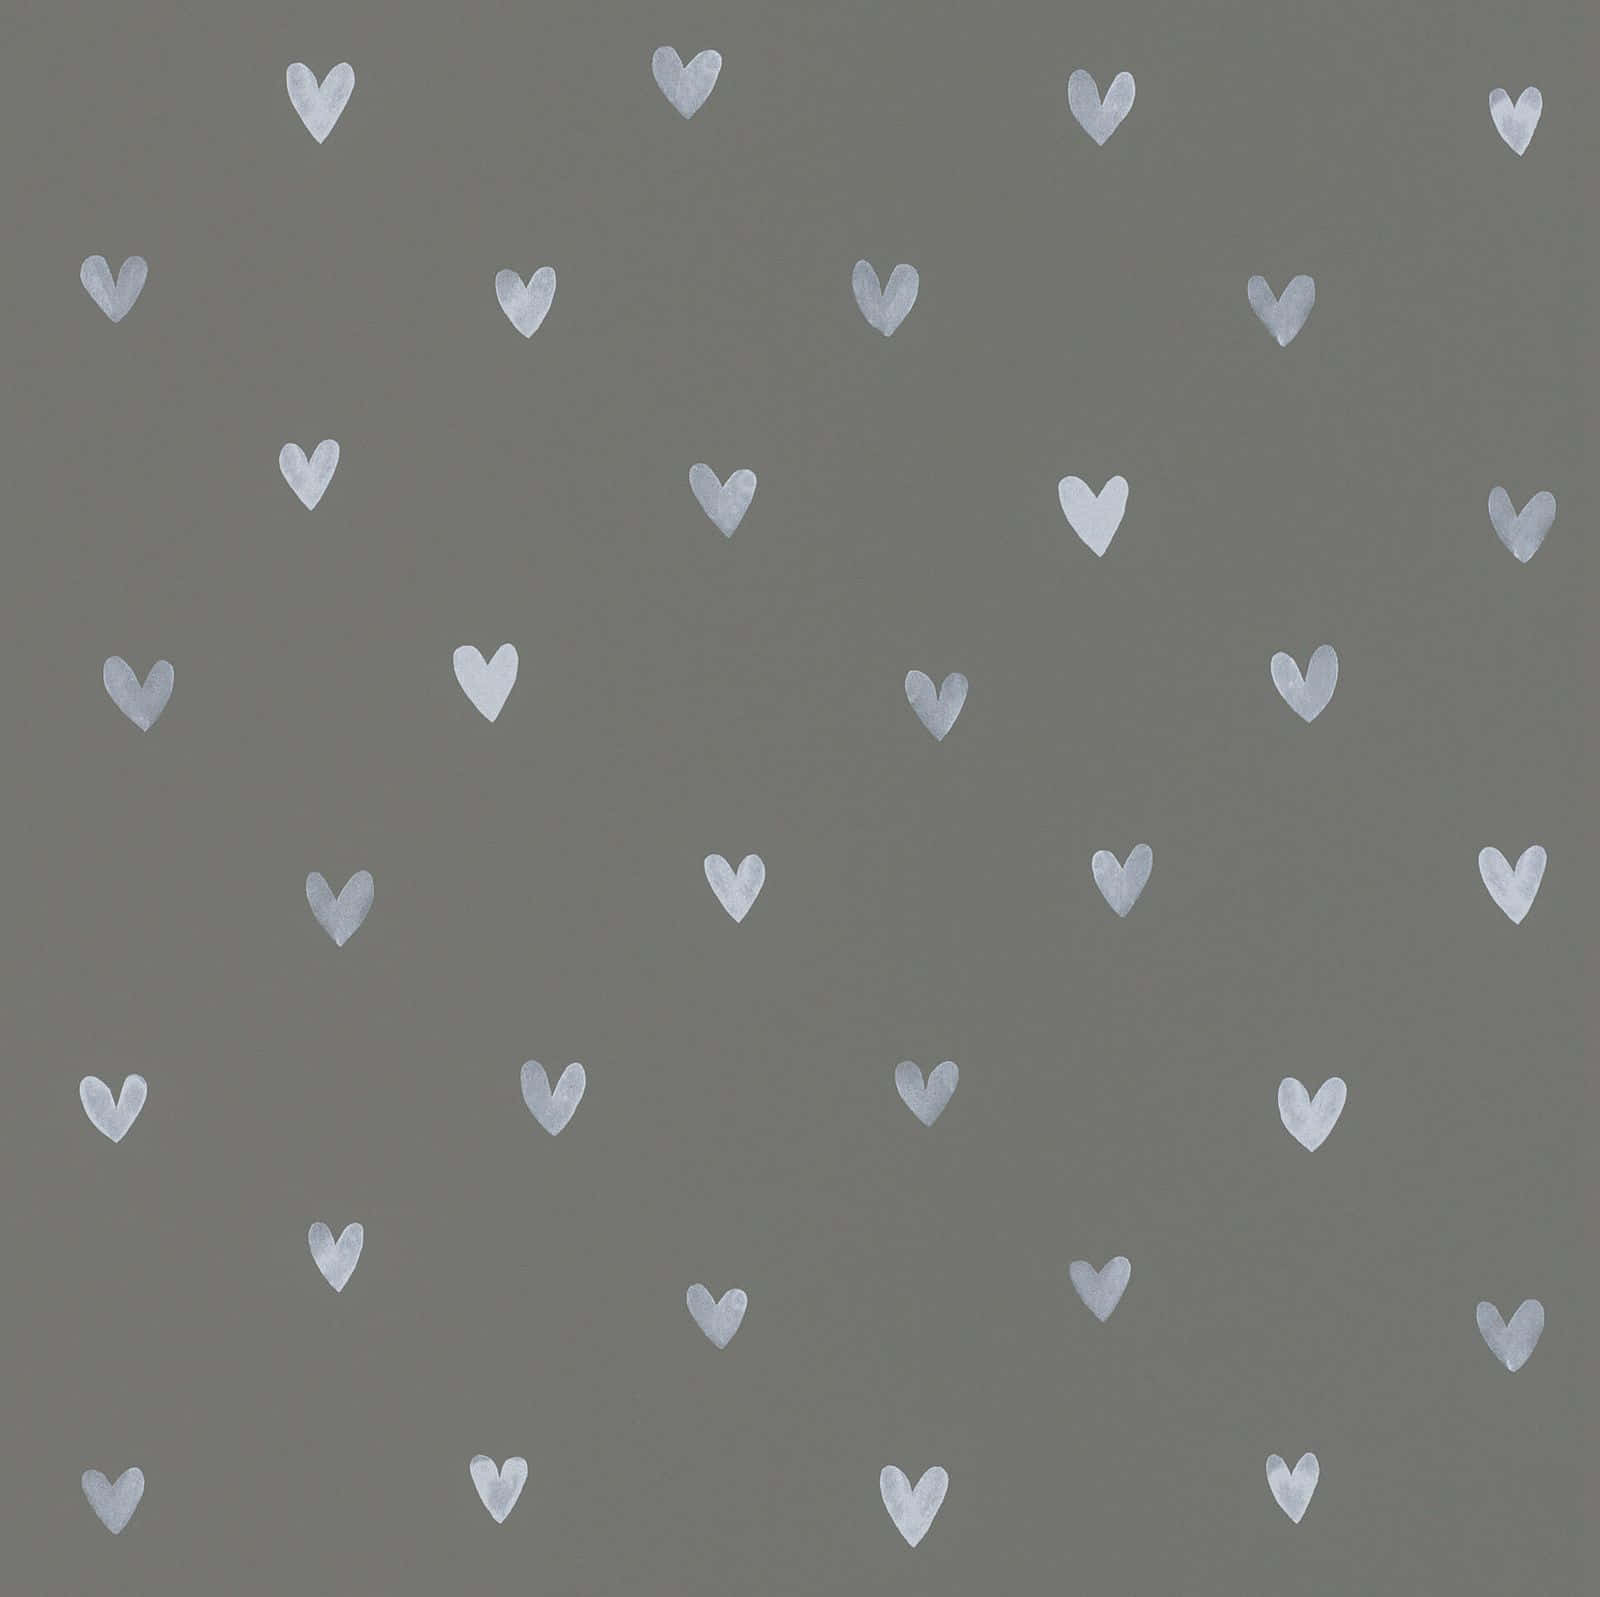 Download Collection of Adorable Hearts Wallpaper | Wallpapers.com